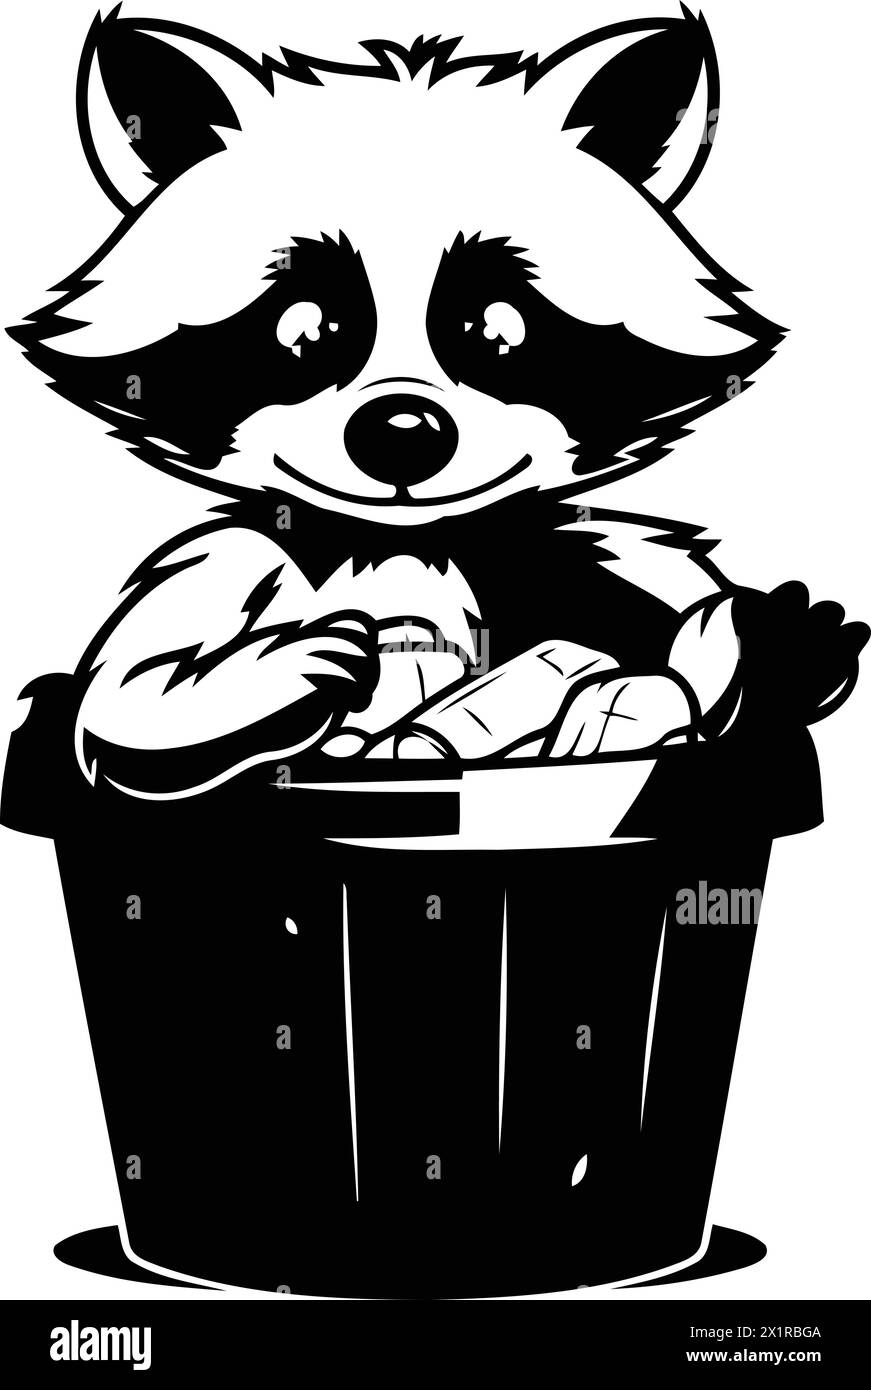 Cute raccoon sitting in a trash can. Vector illustration. Stock Vector